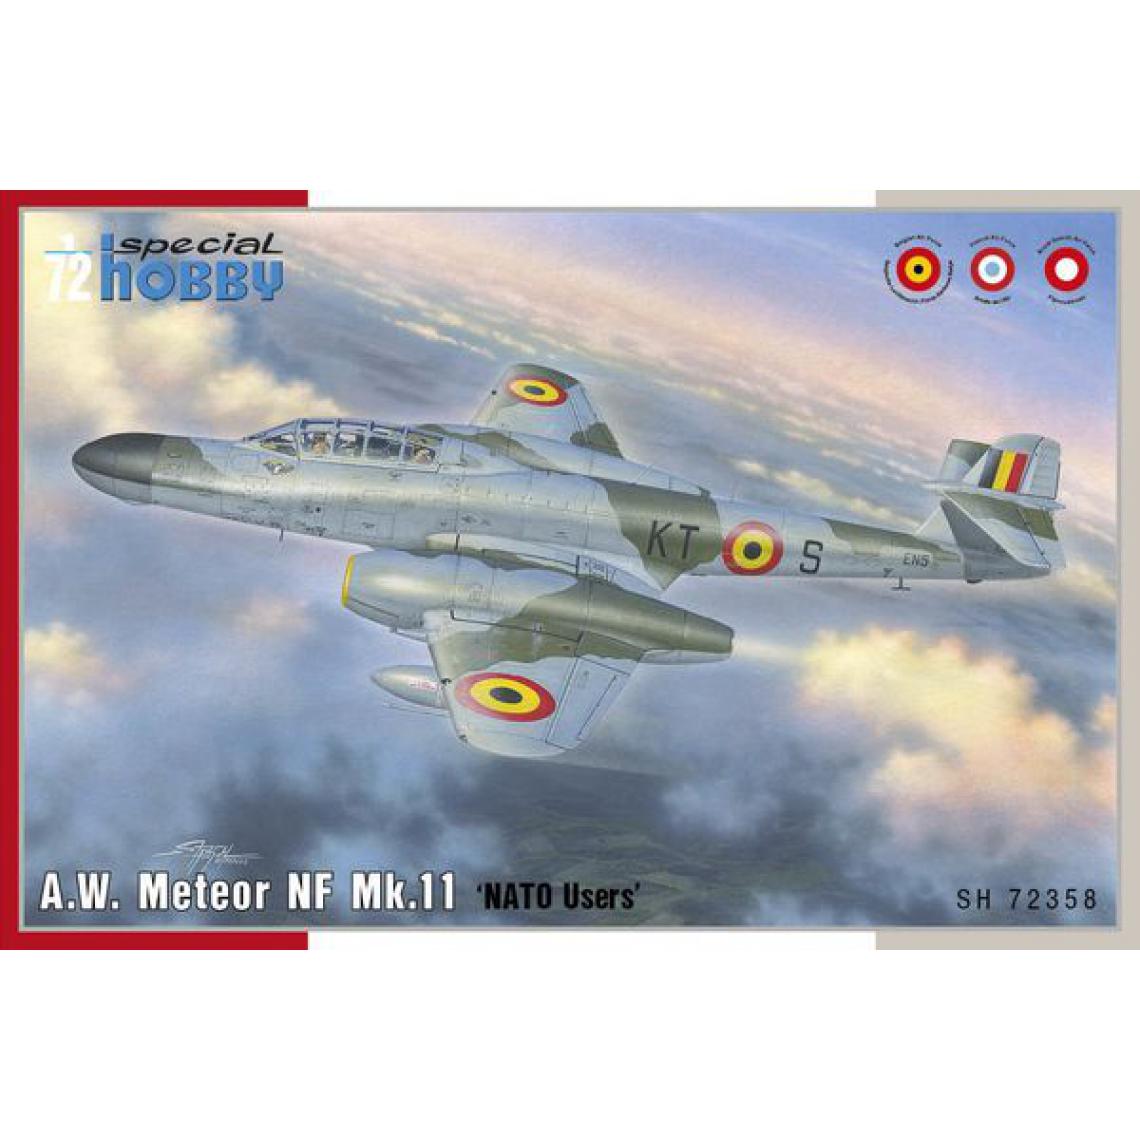 Special Hobby - A.W. Meteor NF Mk.11 - 1:72e - Special Hobby - Accessoires et pièces